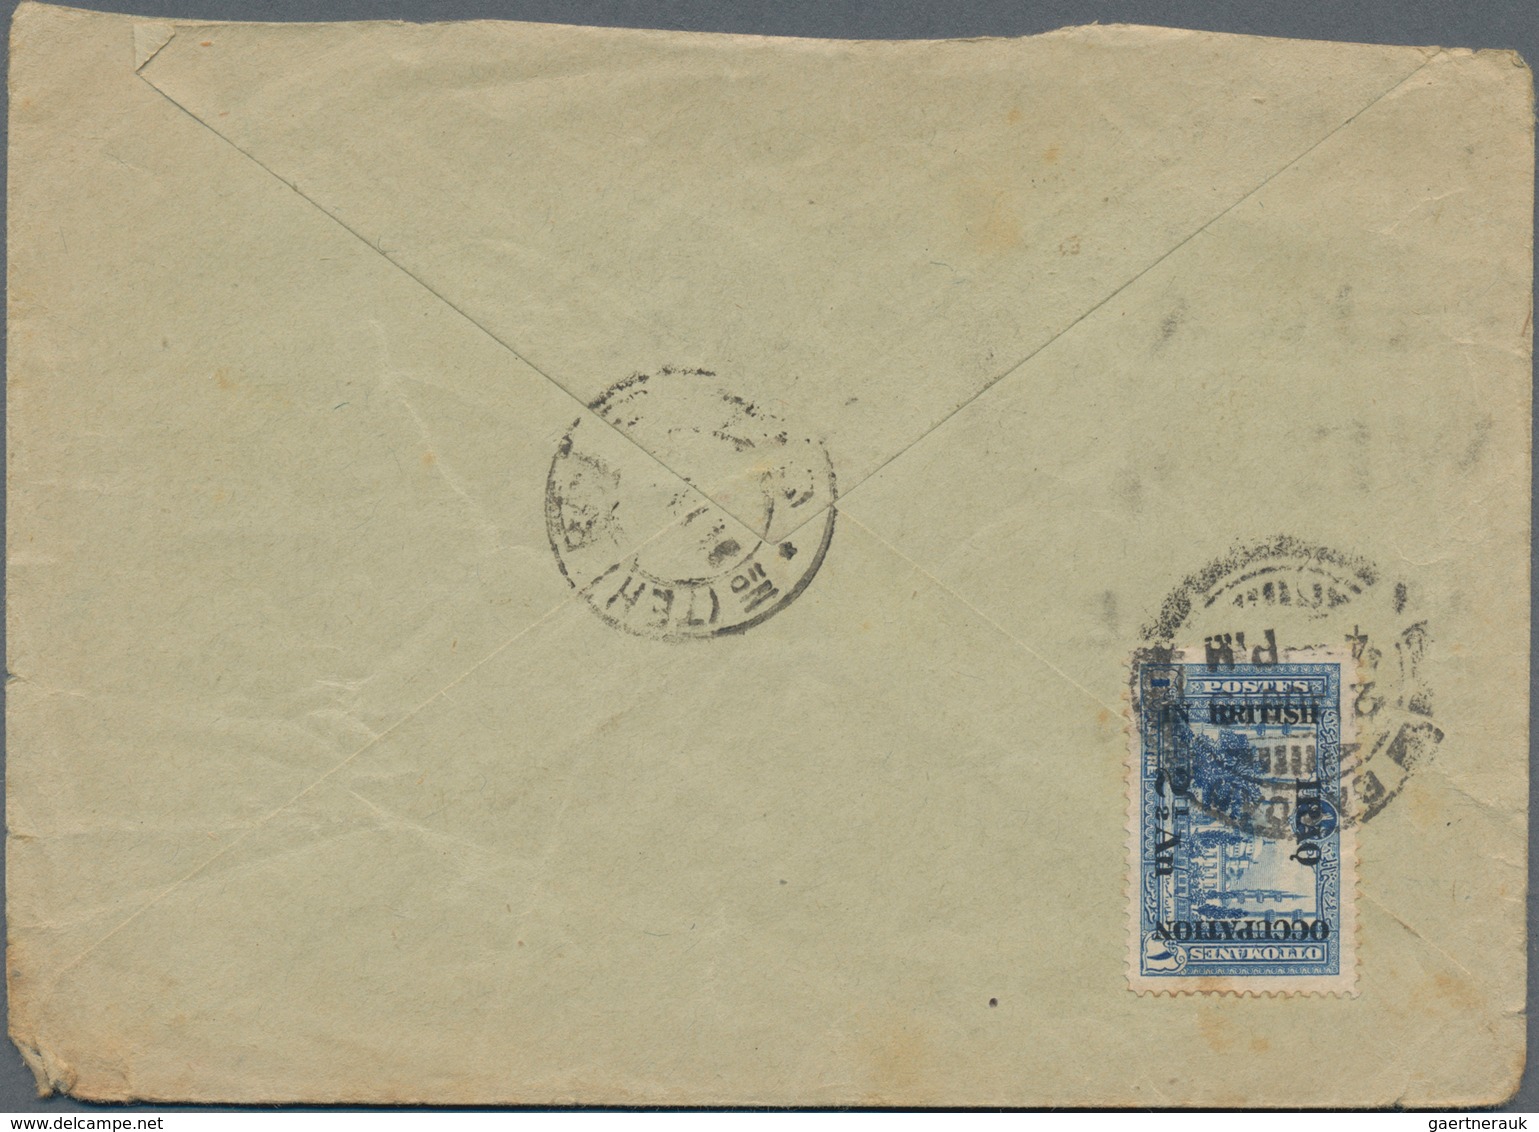 Irak: 1917/80 (ca.), cover lot inc. occupation (4 inc. from "office of the Director of Posts & Teles